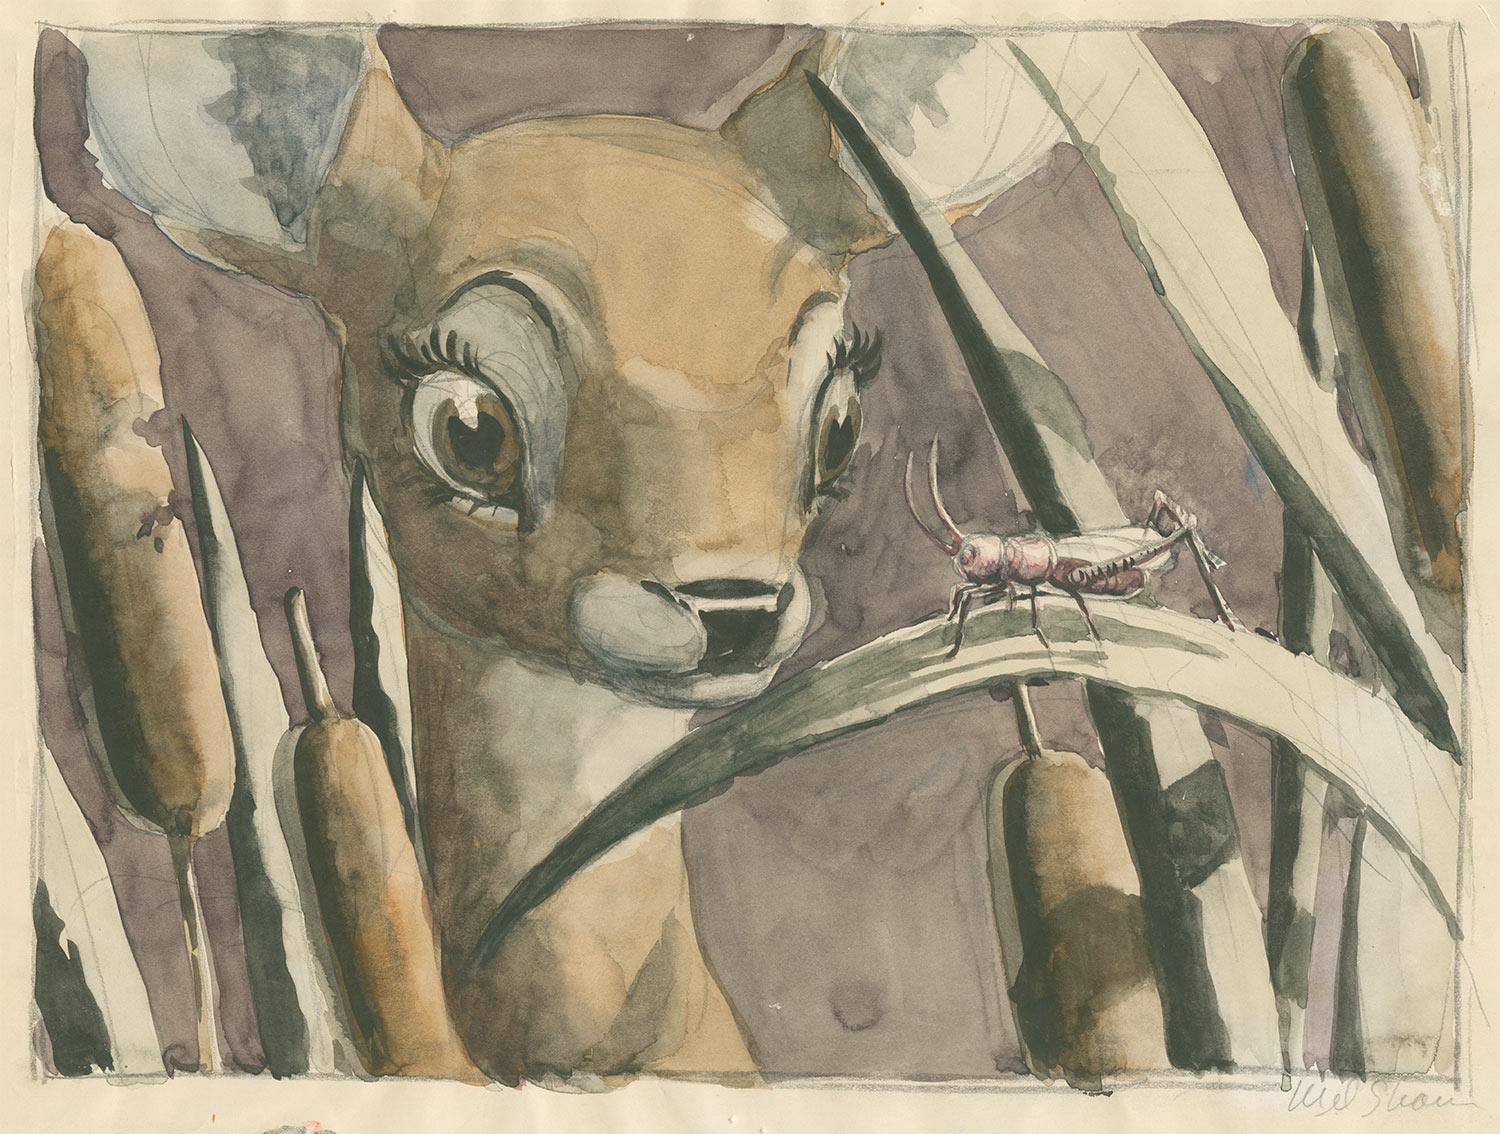 Mel Shaw, visual development for "Bambi," c. 1942. (Image: Rick and Janet Shaw and Melissa Couch, © Disney.)